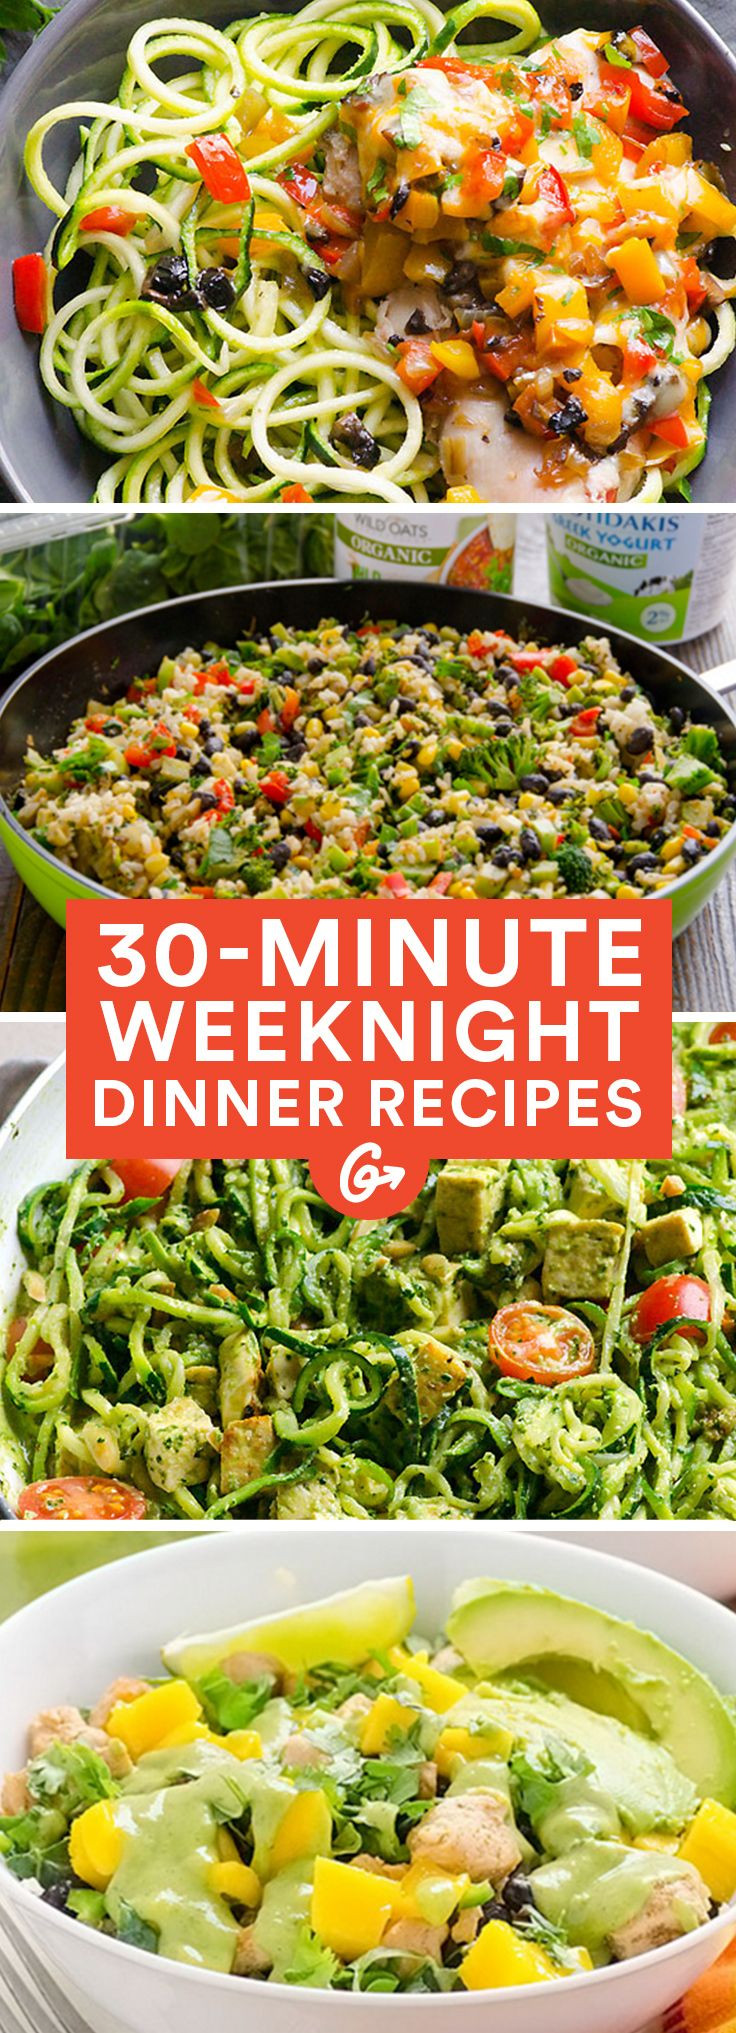 Healthy Weeknight Dinners
 7 Simple Clean Eating Recipes for Busy Weeknights